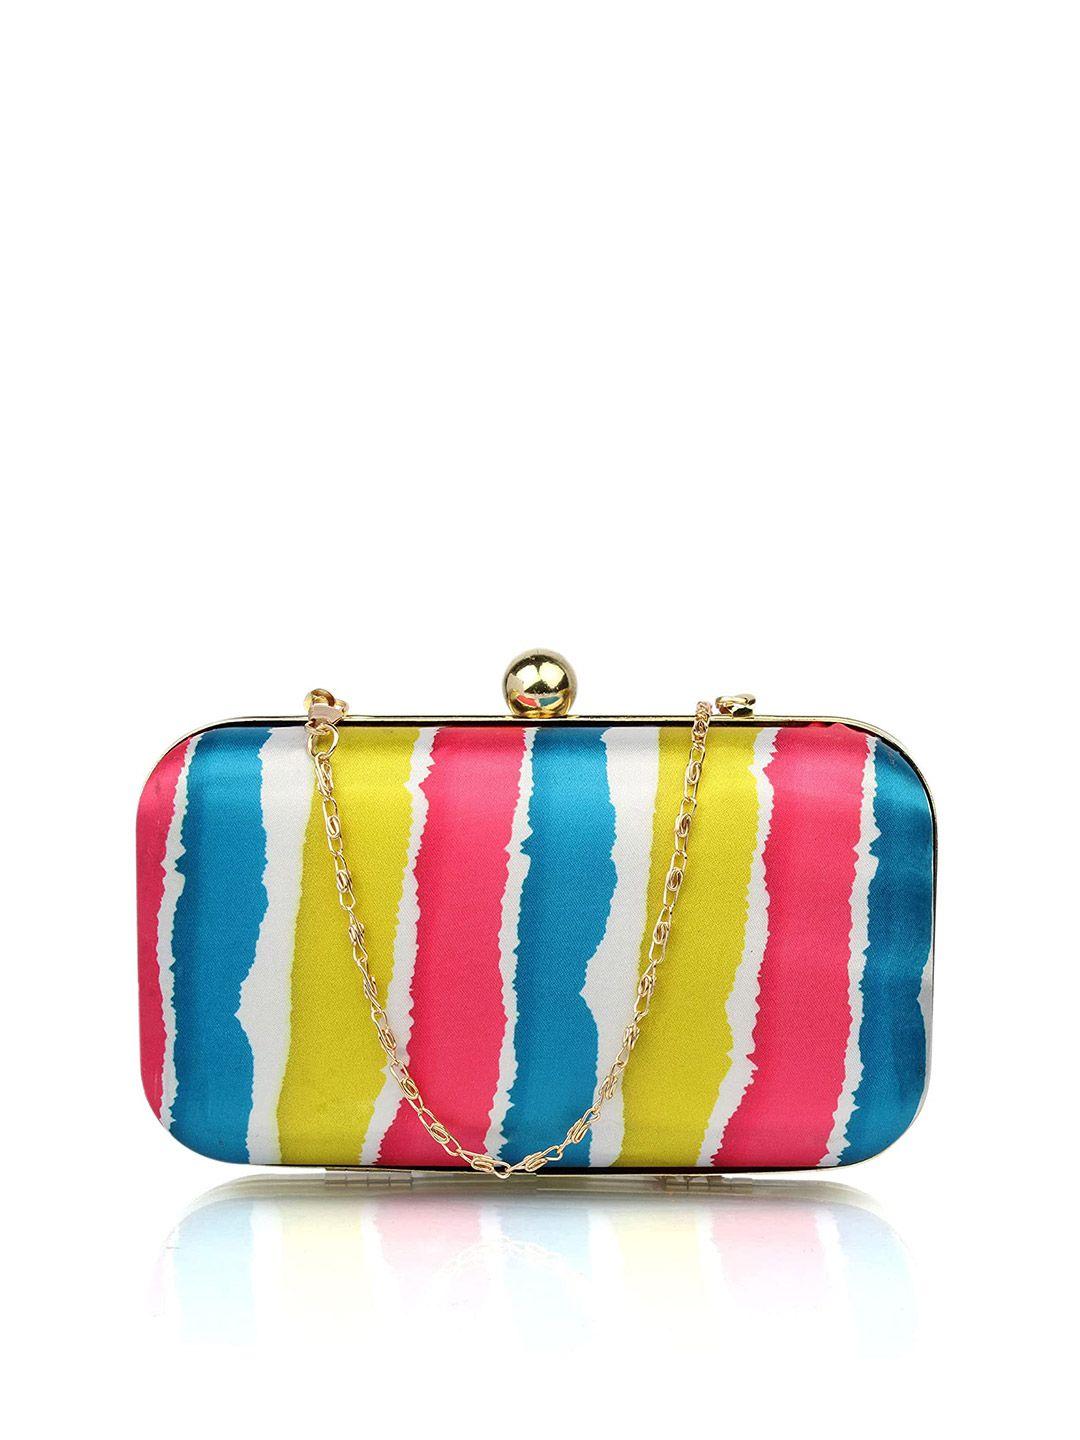 style shoes blue & pink printed box clutch